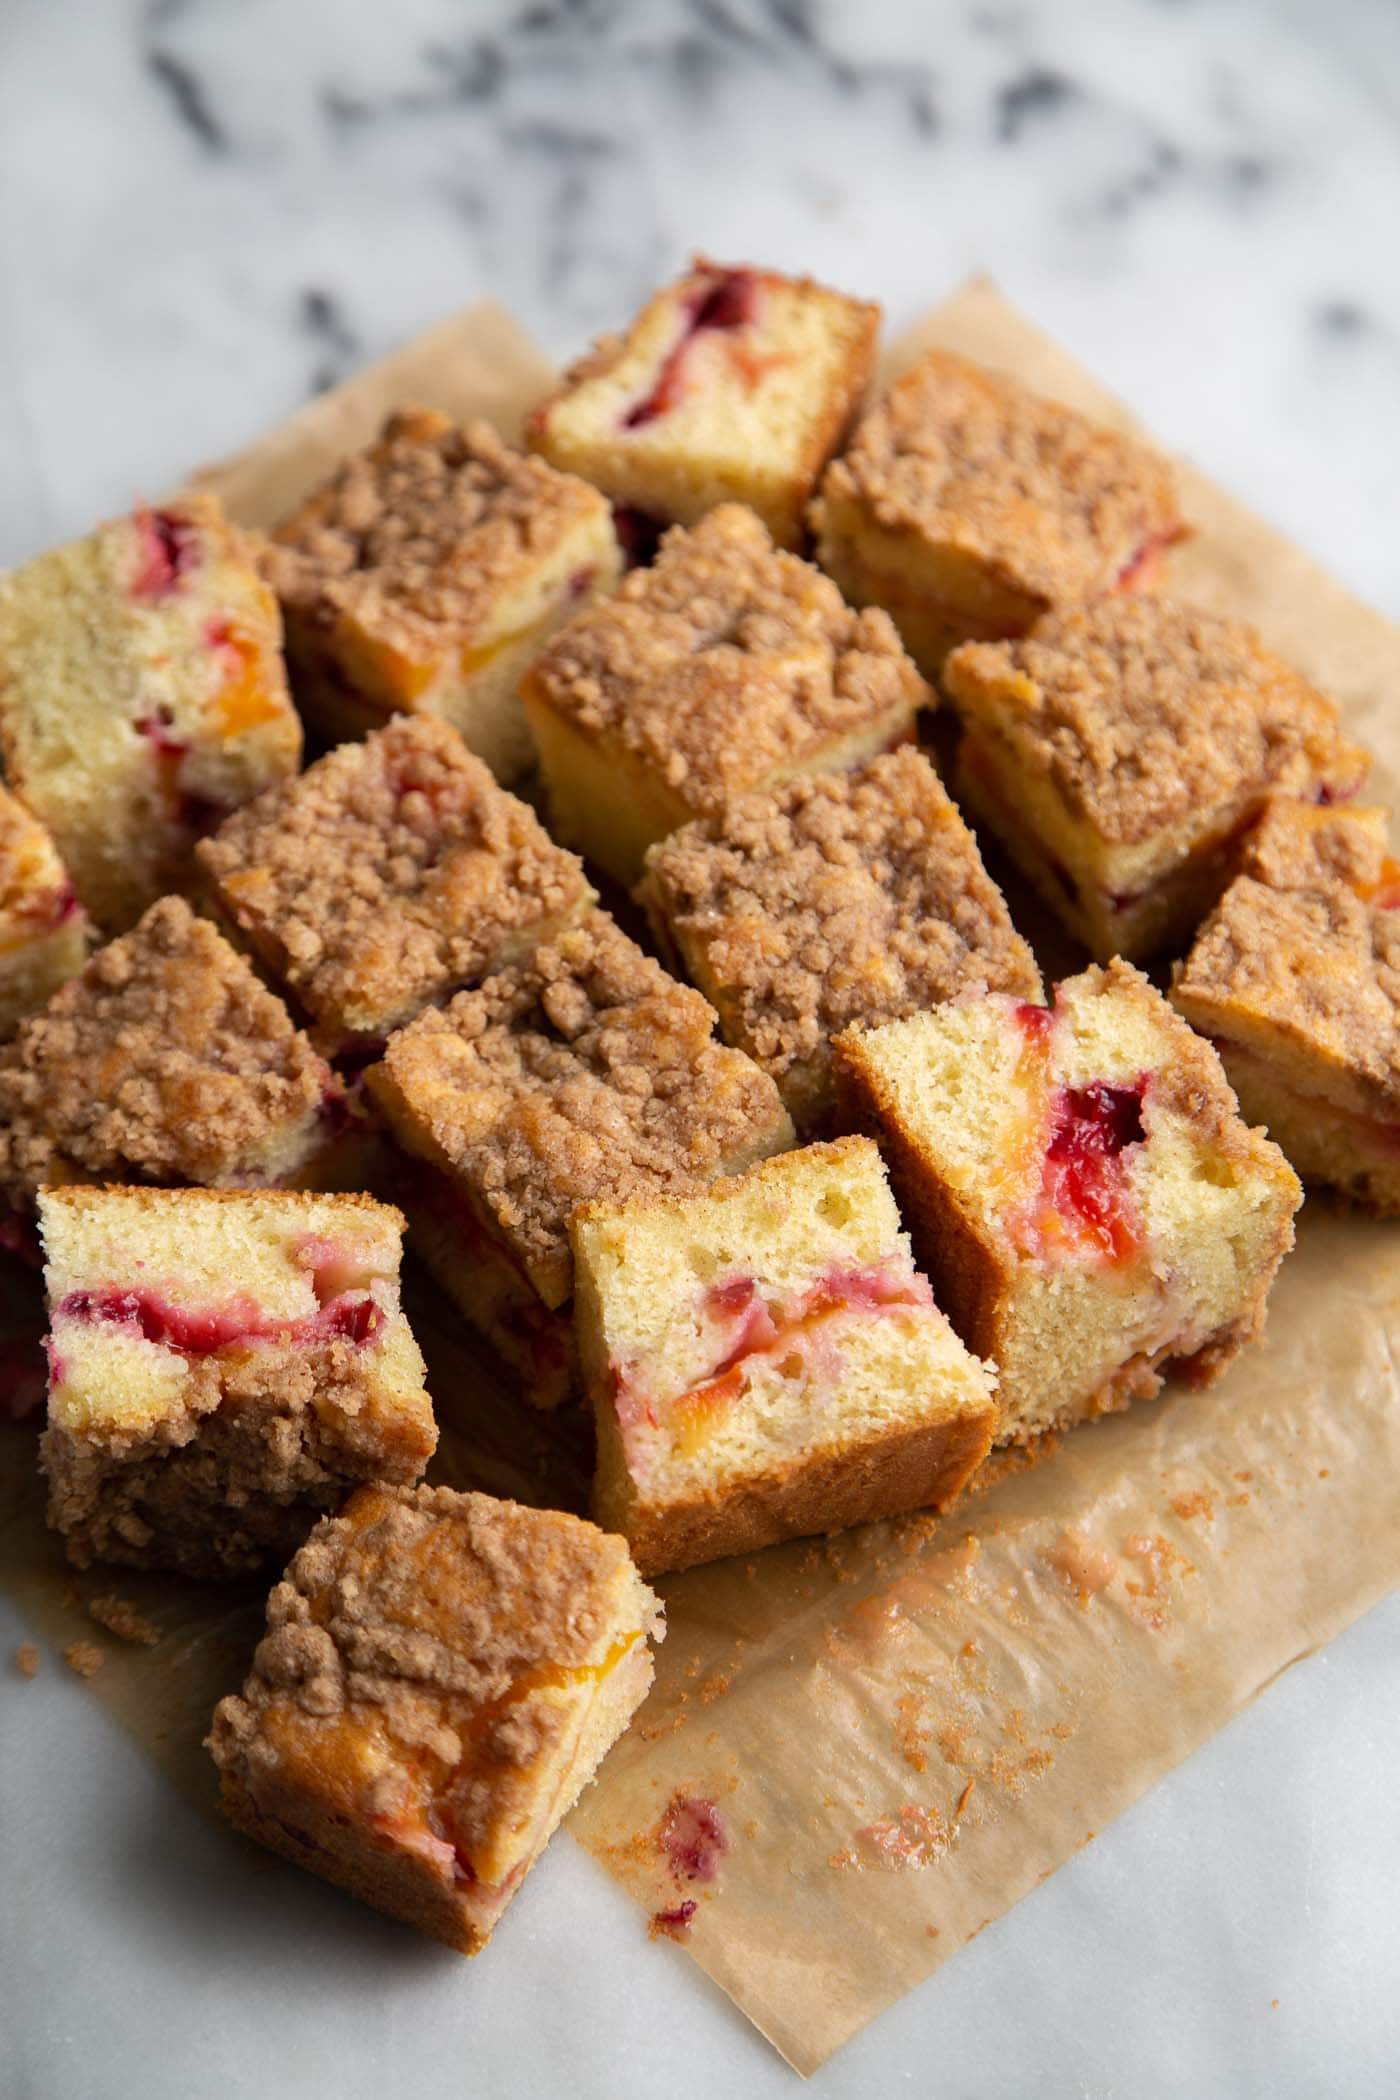 Plumcot Crumb Cake featuring vanilla cake with sliced plumcots and spiced crumble topping